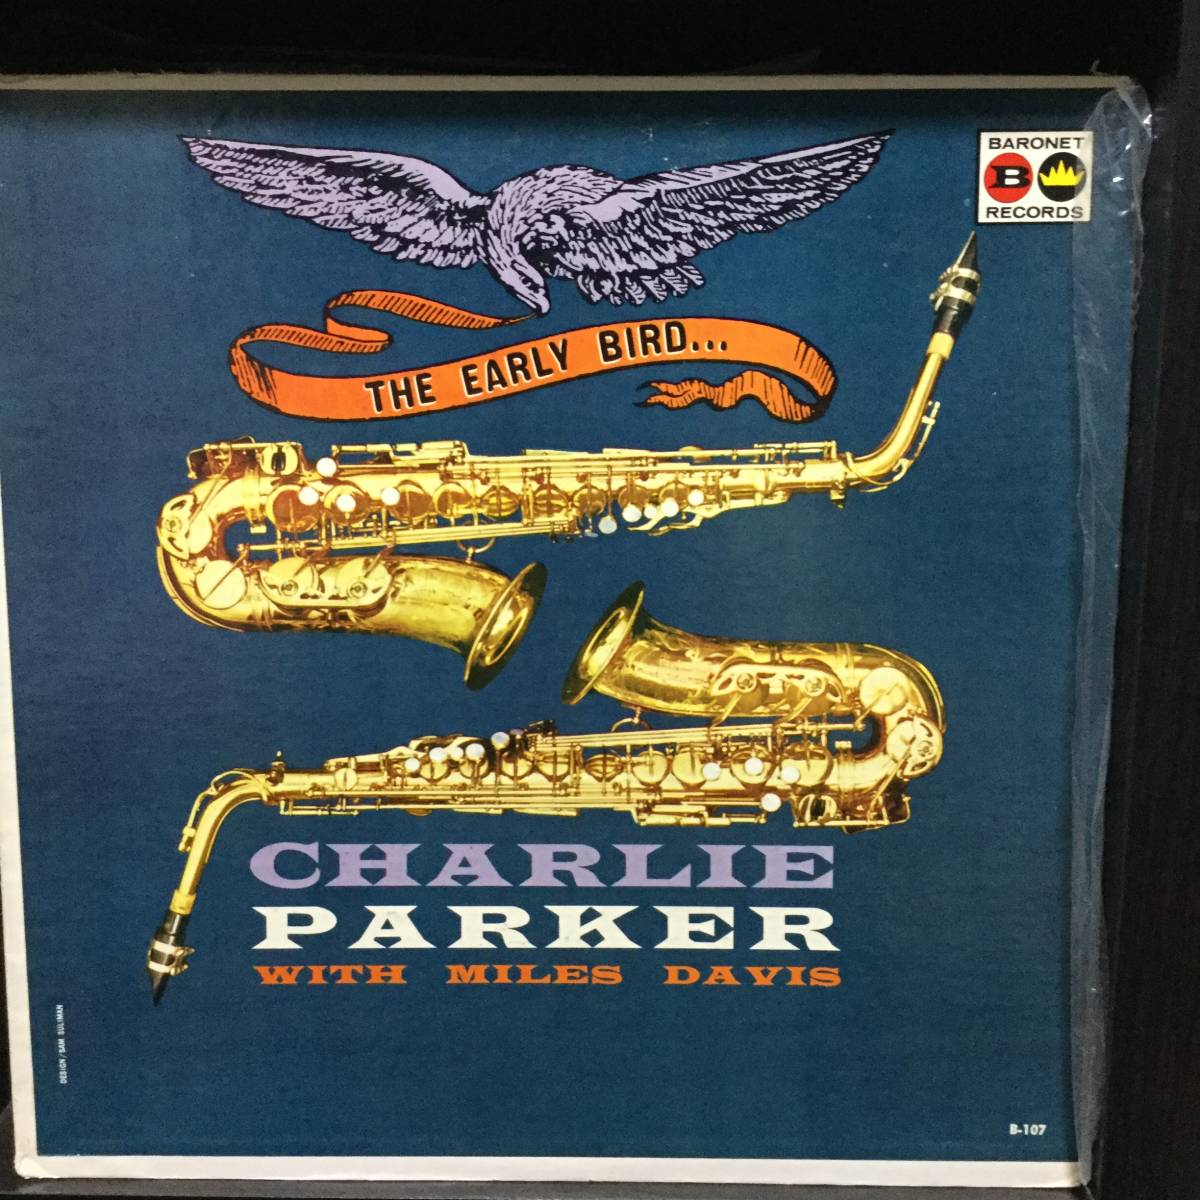 Baronet【 B-107 : The Early Bird... 】Charlie Parker with Miles Davis_画像1